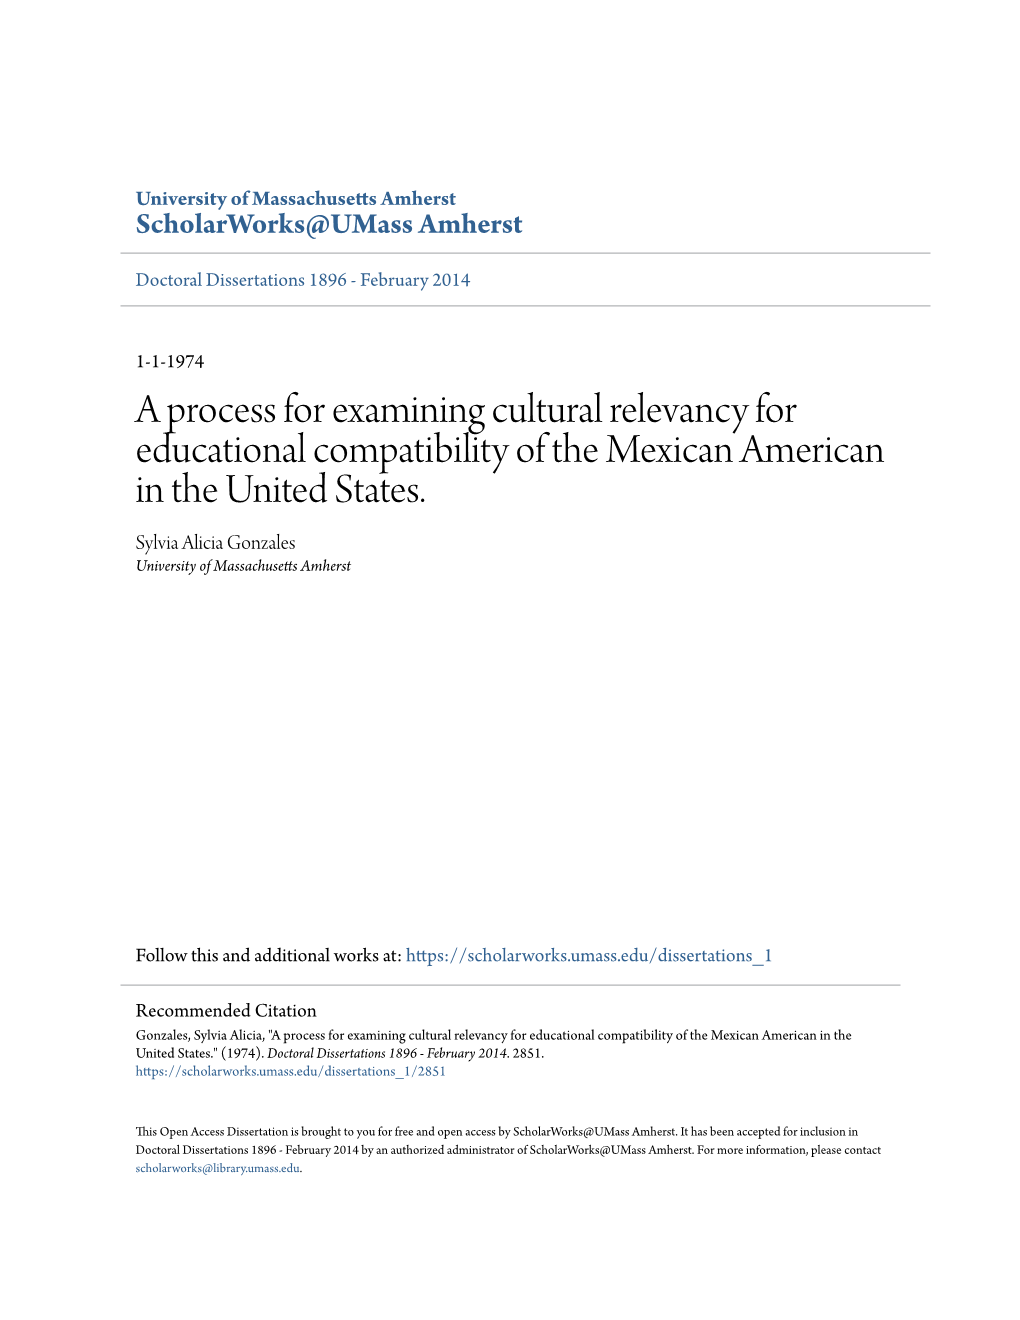 A Process for Examining Cultural Relevancy for Educational Compatibility of the Mexican American in the United States